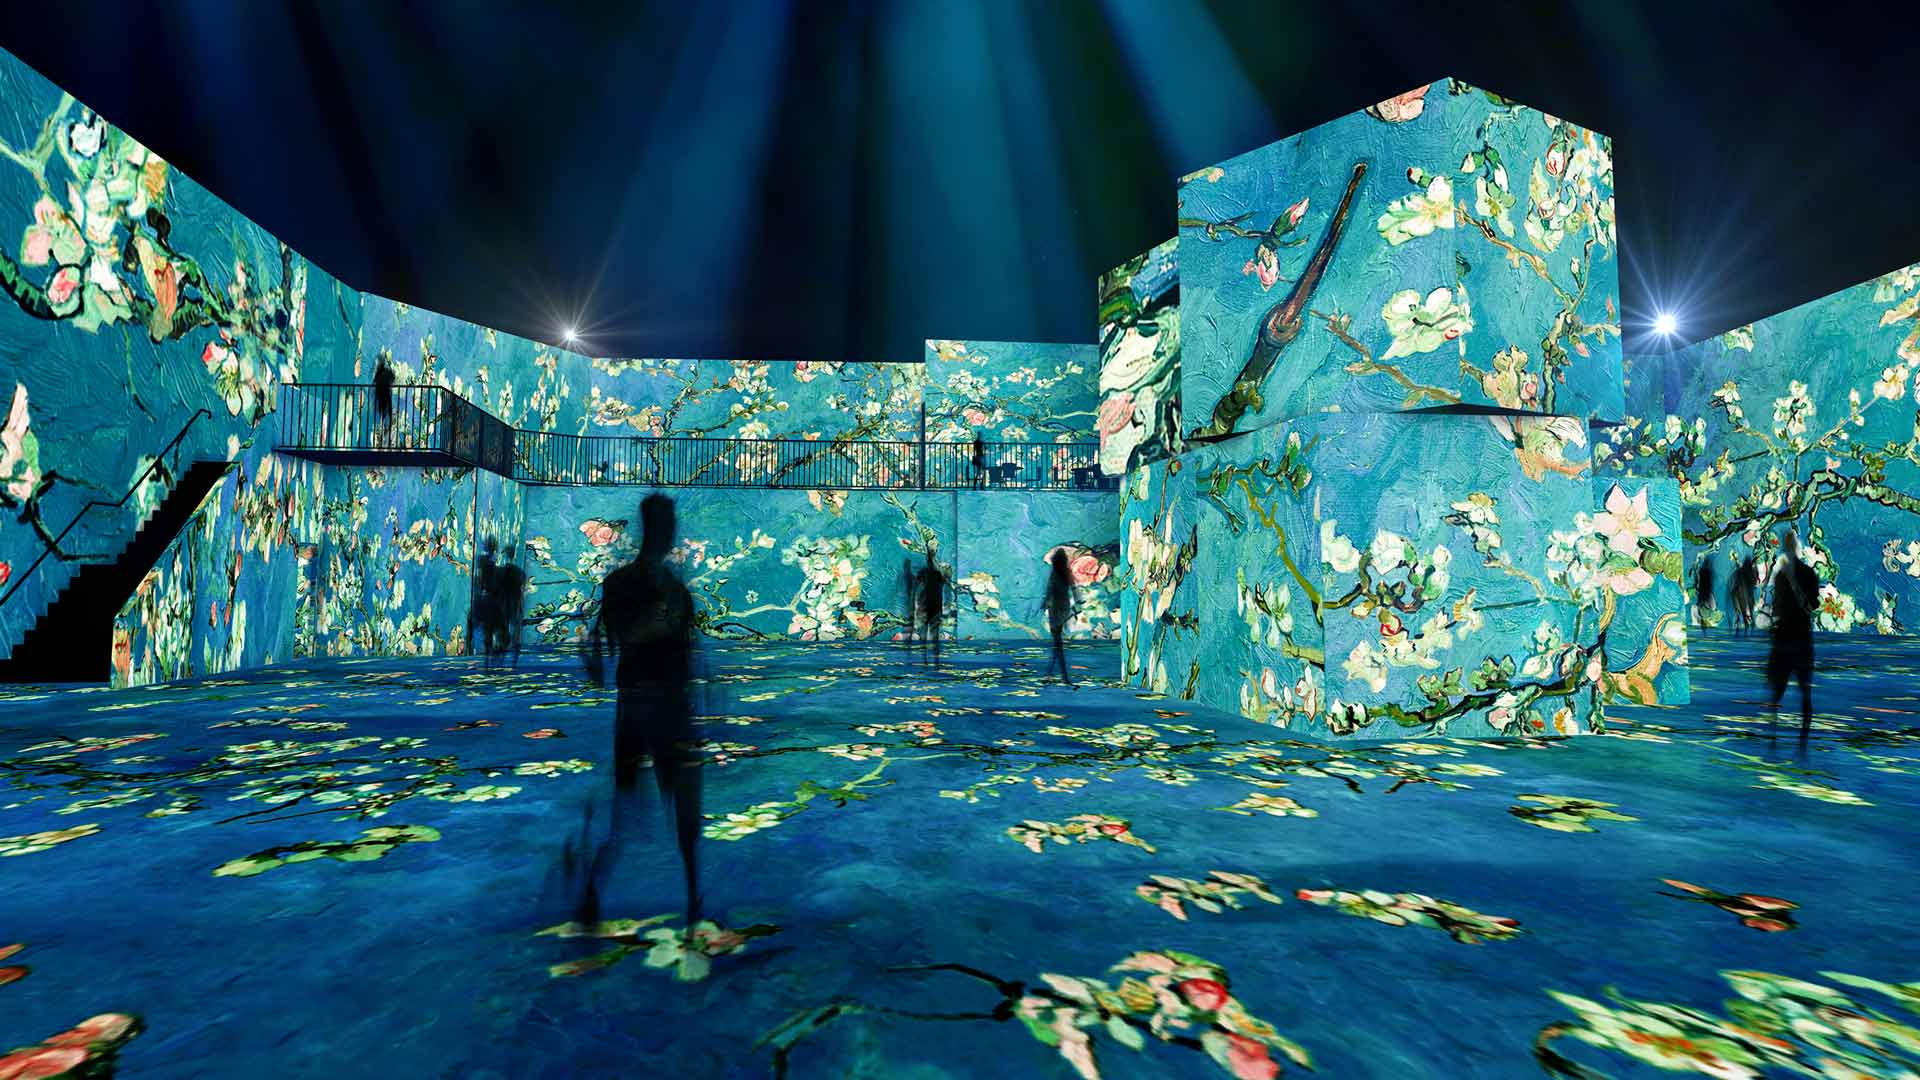 Melbourne's Multi-Sensory Digital Art Gallery The Lume Is Finally Set to Open This Spring